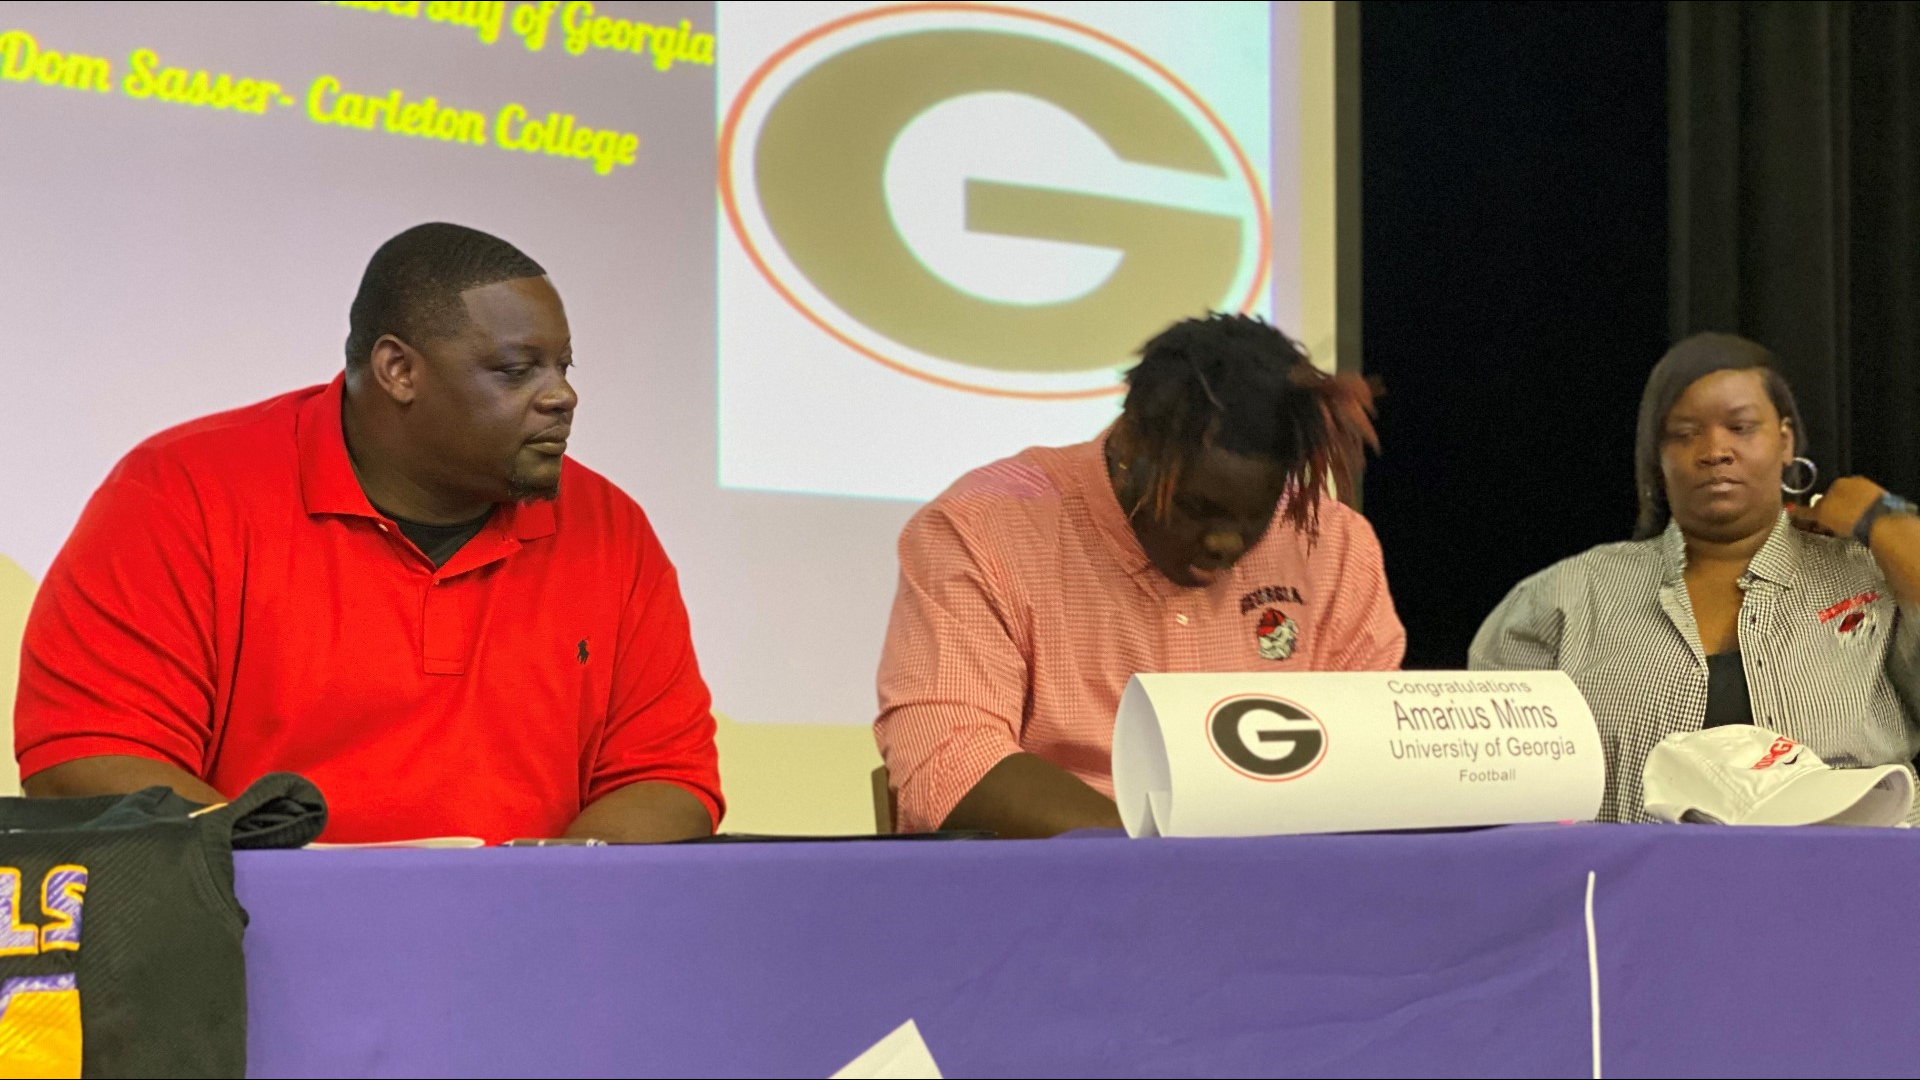 He went from Bleckley County to UGA, but he is also set to head to the NFL during the 2024 NFL Draft.